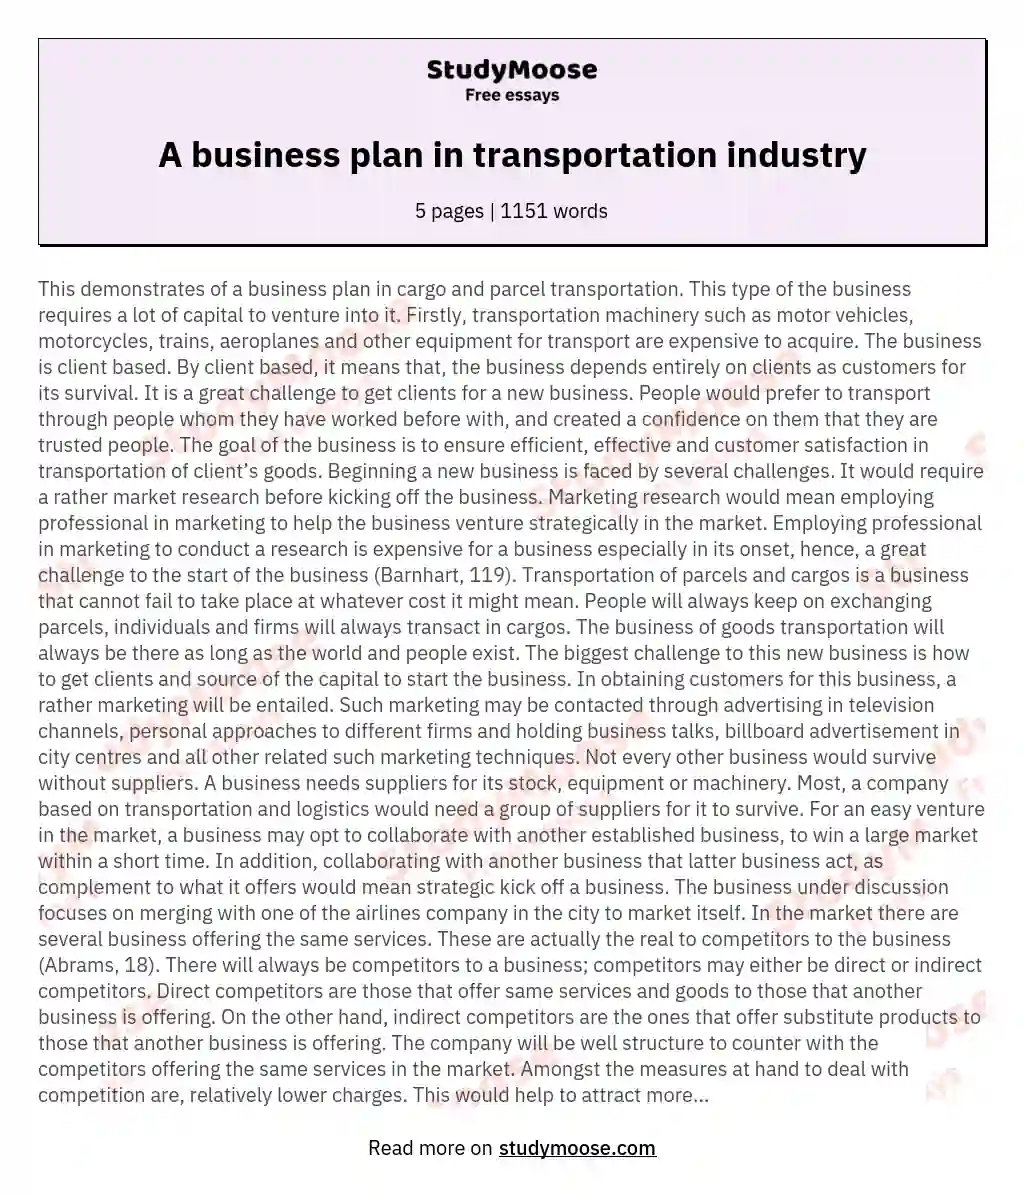 A business plan in transportation industry